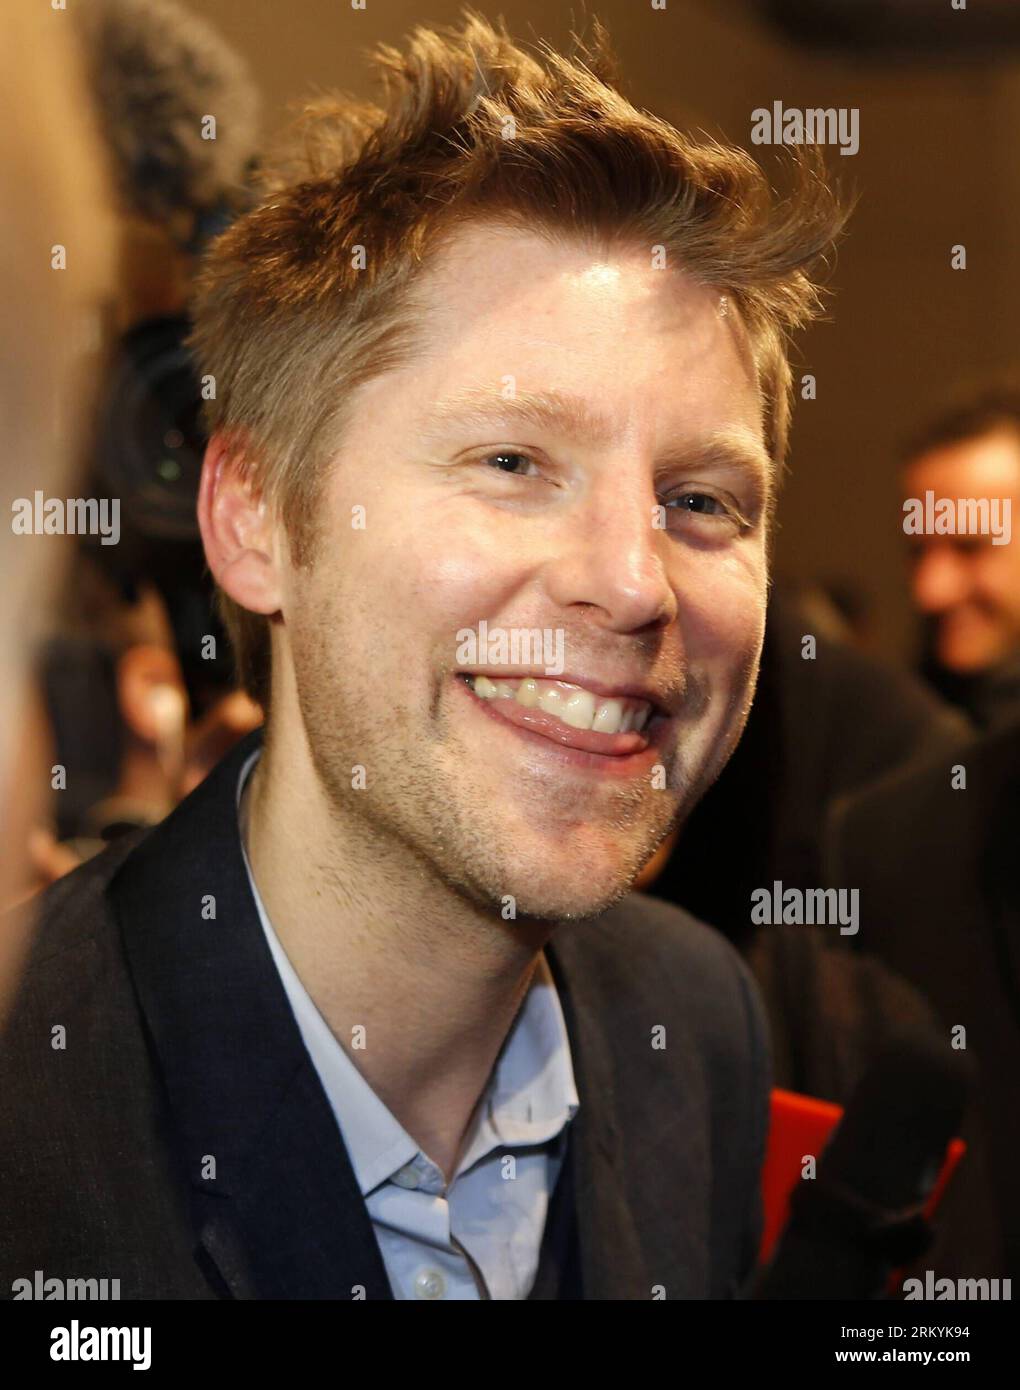 (130218) -- LONDON, Feb. 18, 2013 (Xinhua) -- Christopher Bailey, the Chief Creative Officer of Burberry, is interviewed by the media after the Burberry Prorsum Autumn/Winter 2013 Womenswear Show at Kensington Gardens during London Fashion Week in London, Britain, on Feb. 18, 2013.(Xinhua/Wang Lili) BRITAIN-LONDON-FASHION WEEK-BURBERRY PRORSUM PUBLICATIONxNOTxINxCHN Stock Photo